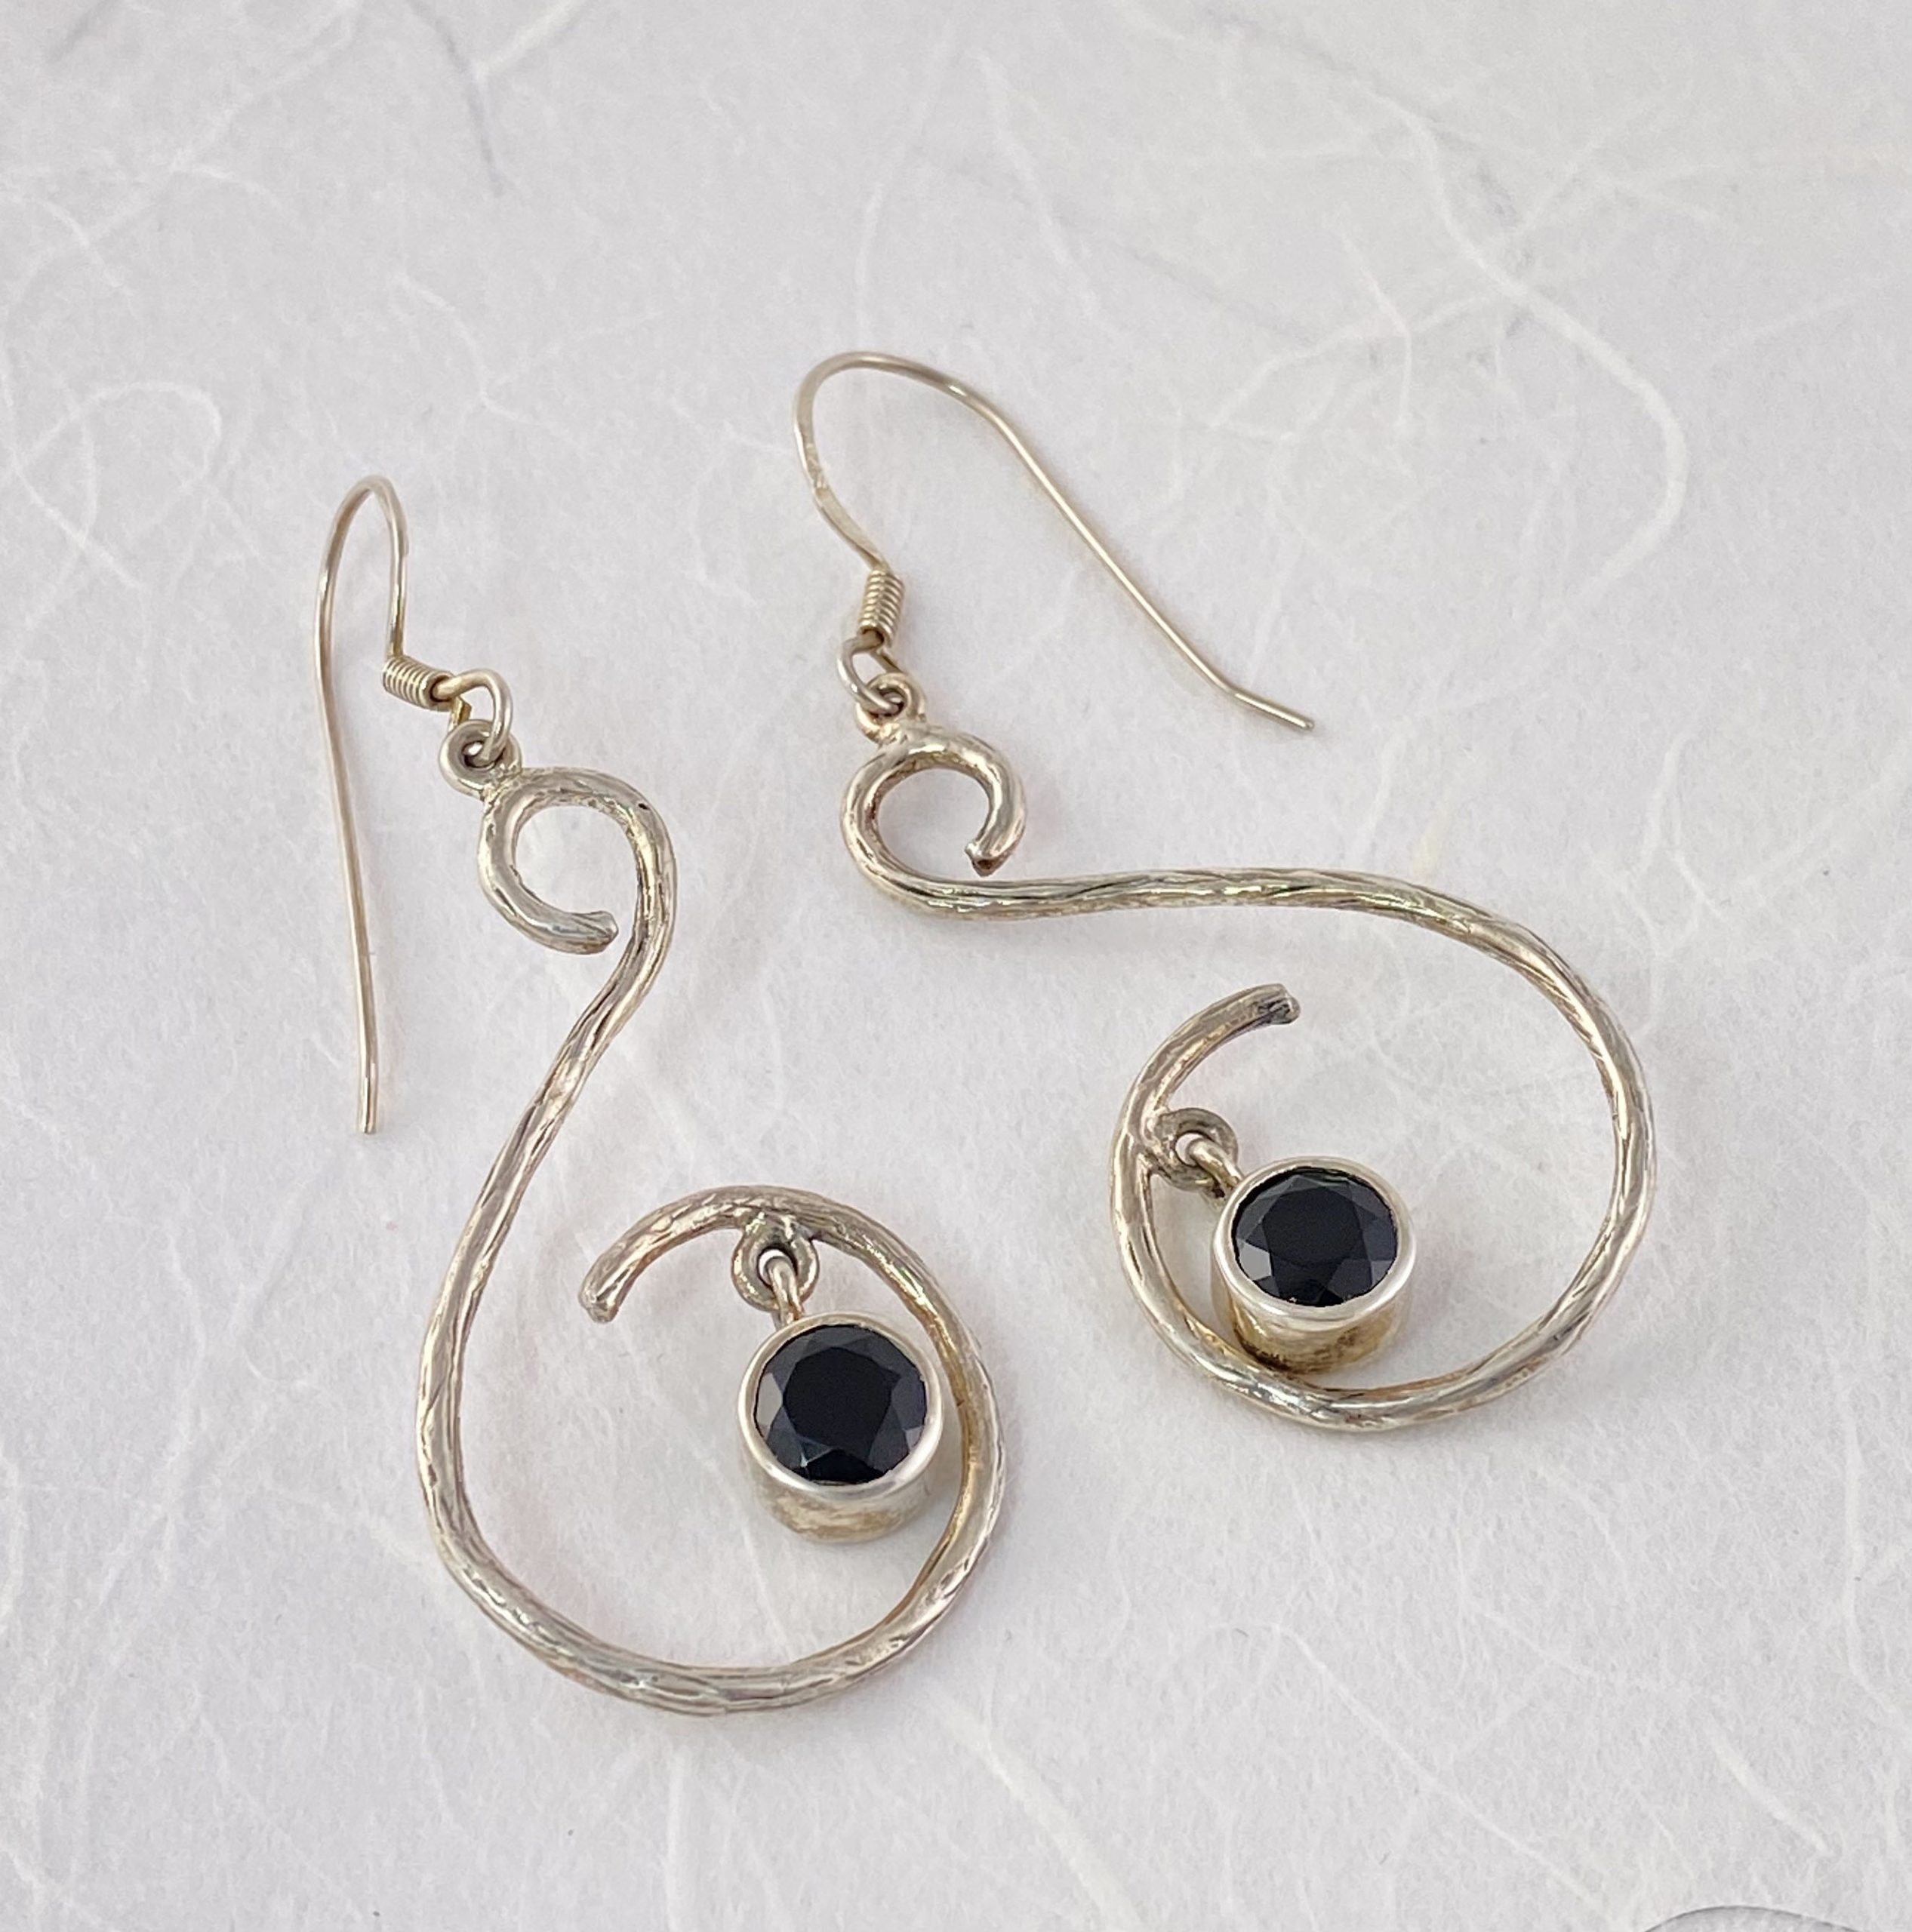 Black onyz stone and silver earrings view 2